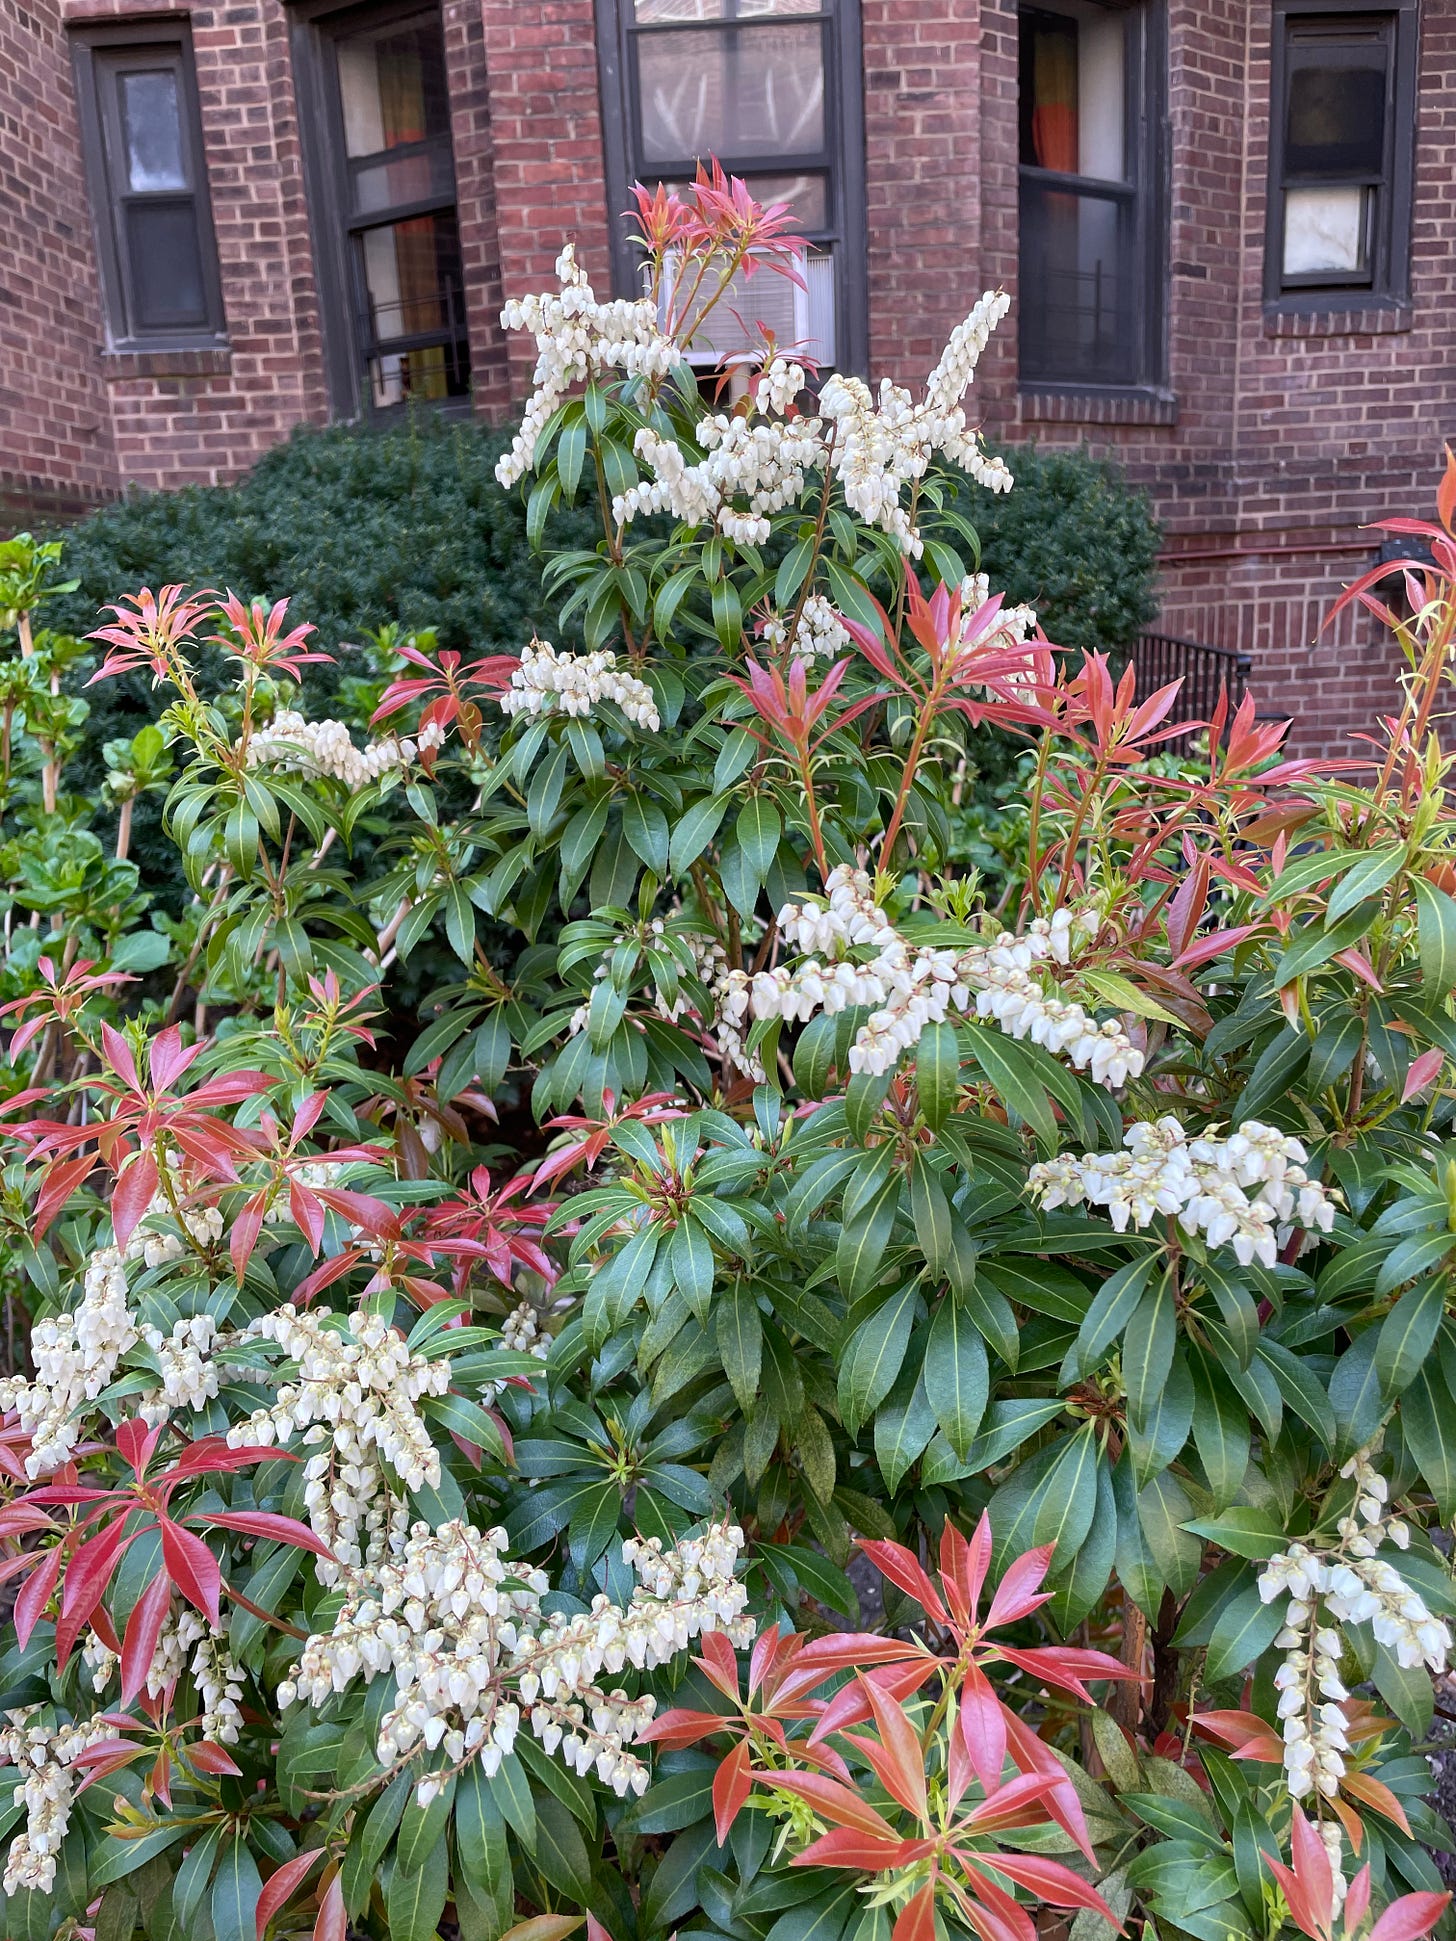 ID: Photo of a multicolored shrub with green foliage, red new growth shaped like stars, and tine white pendulous flowers.